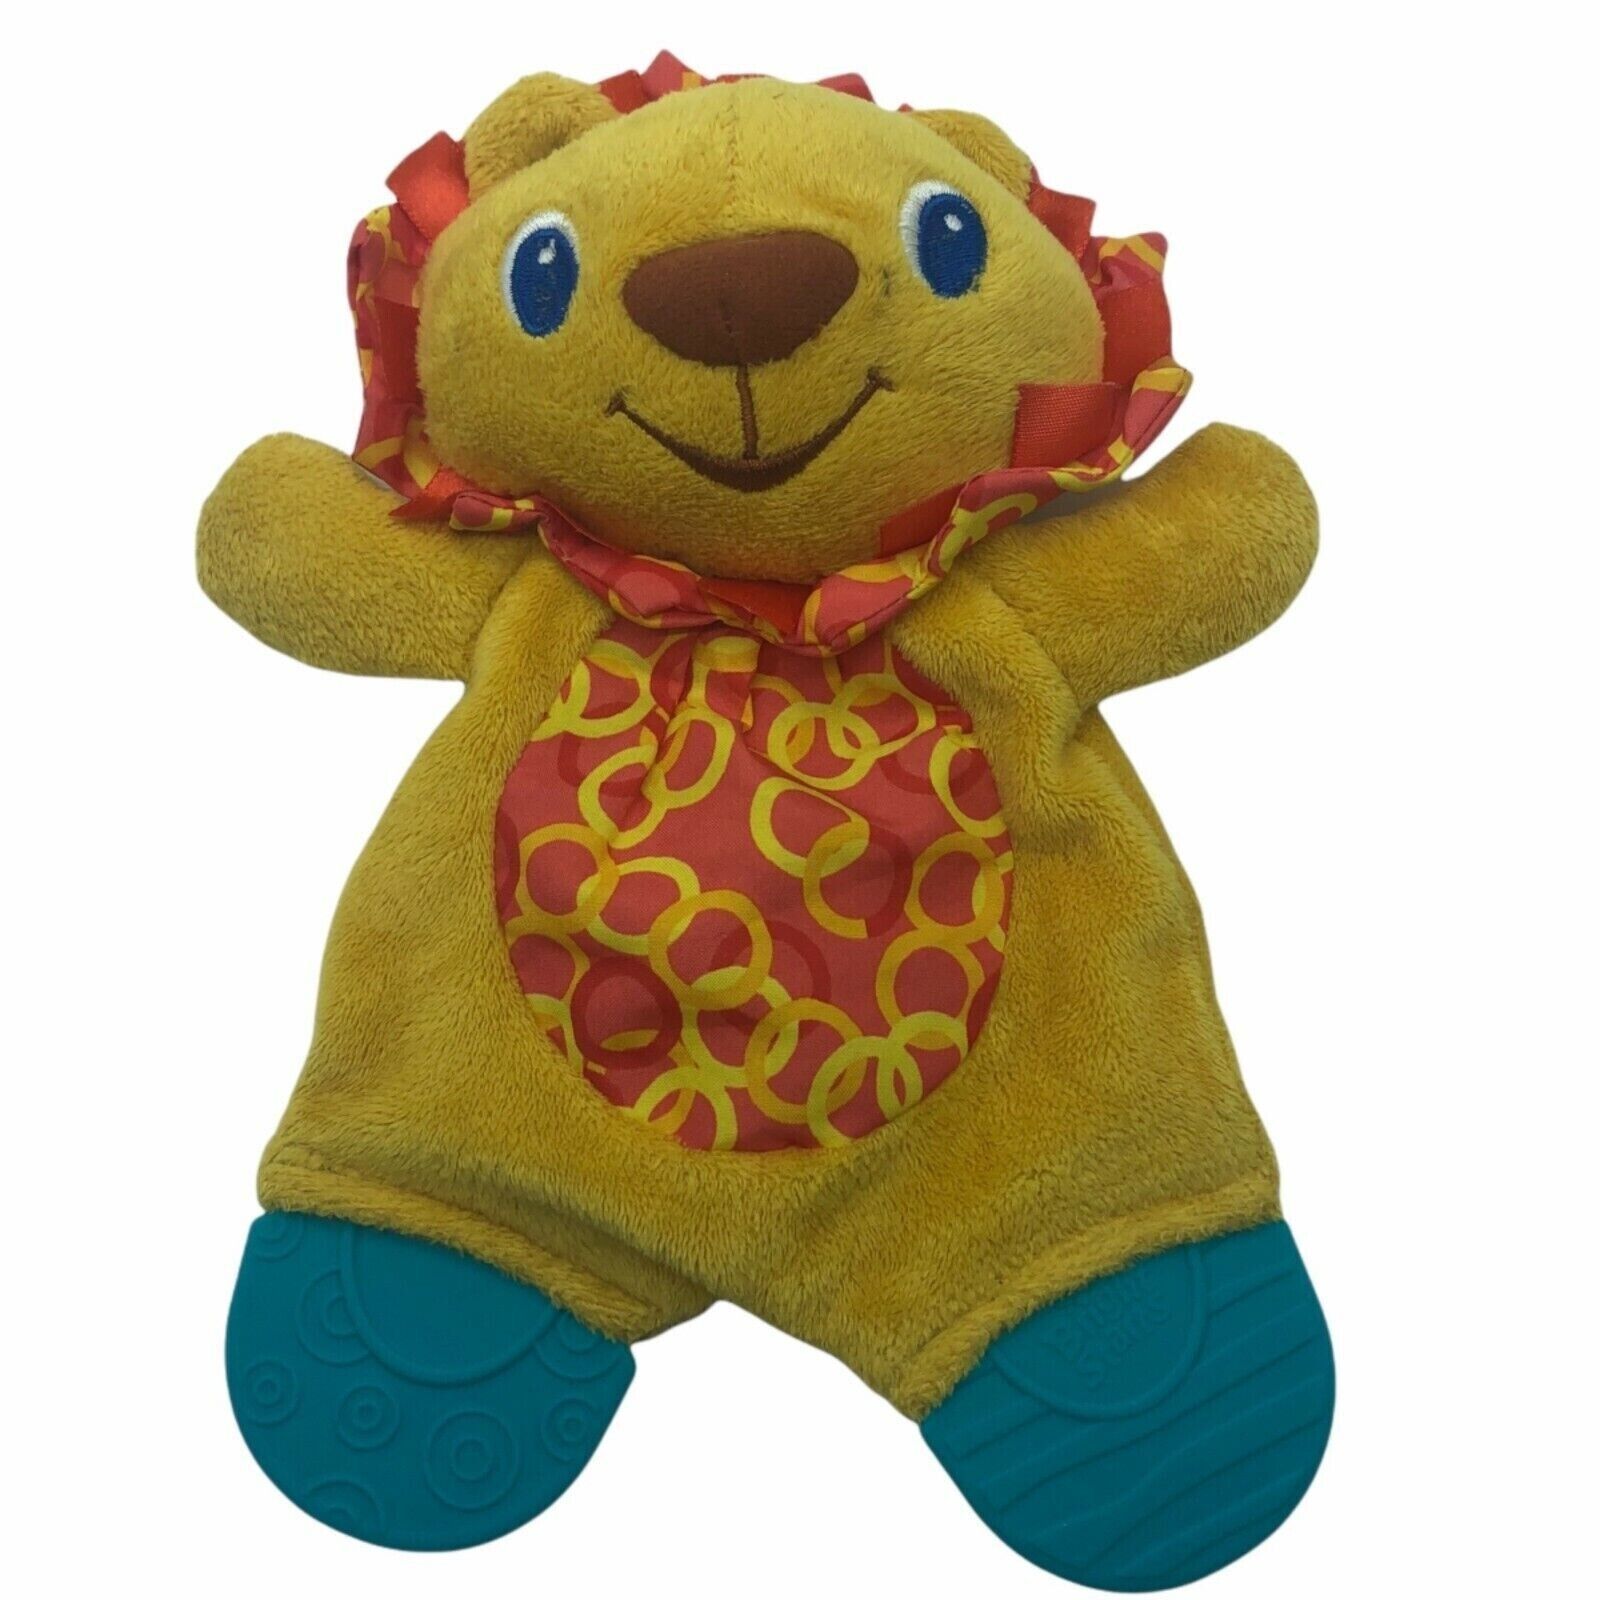 Bright Starts Lion Snuggle Teether Security Blanket Lovey Small 7" x 9" - $12.67